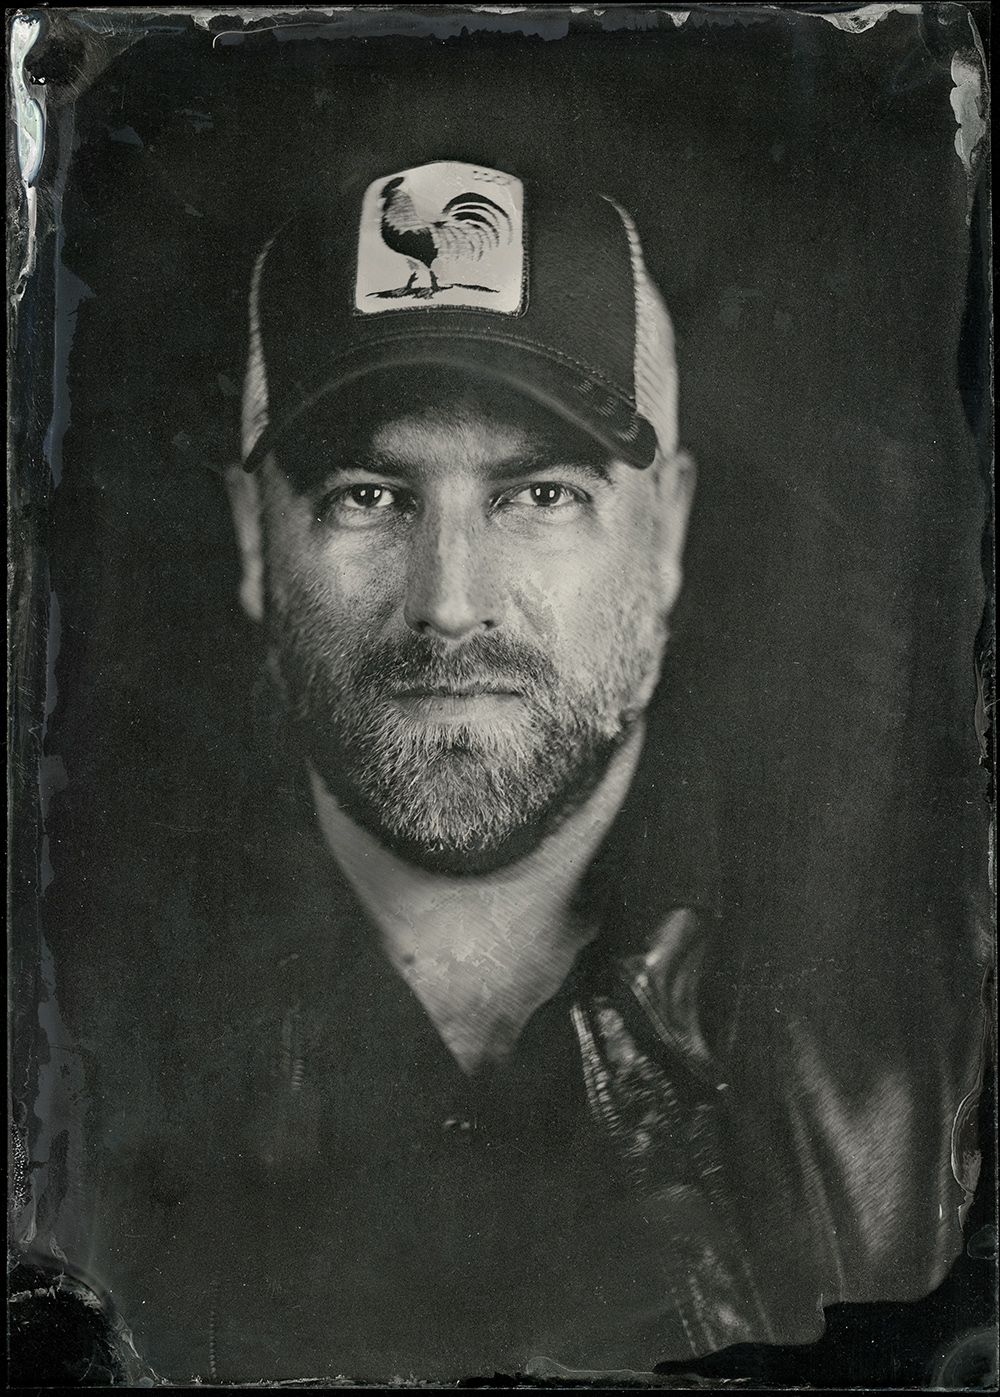 Pierre-Mathieu Fortin, picture taken using a century-old collodion process.